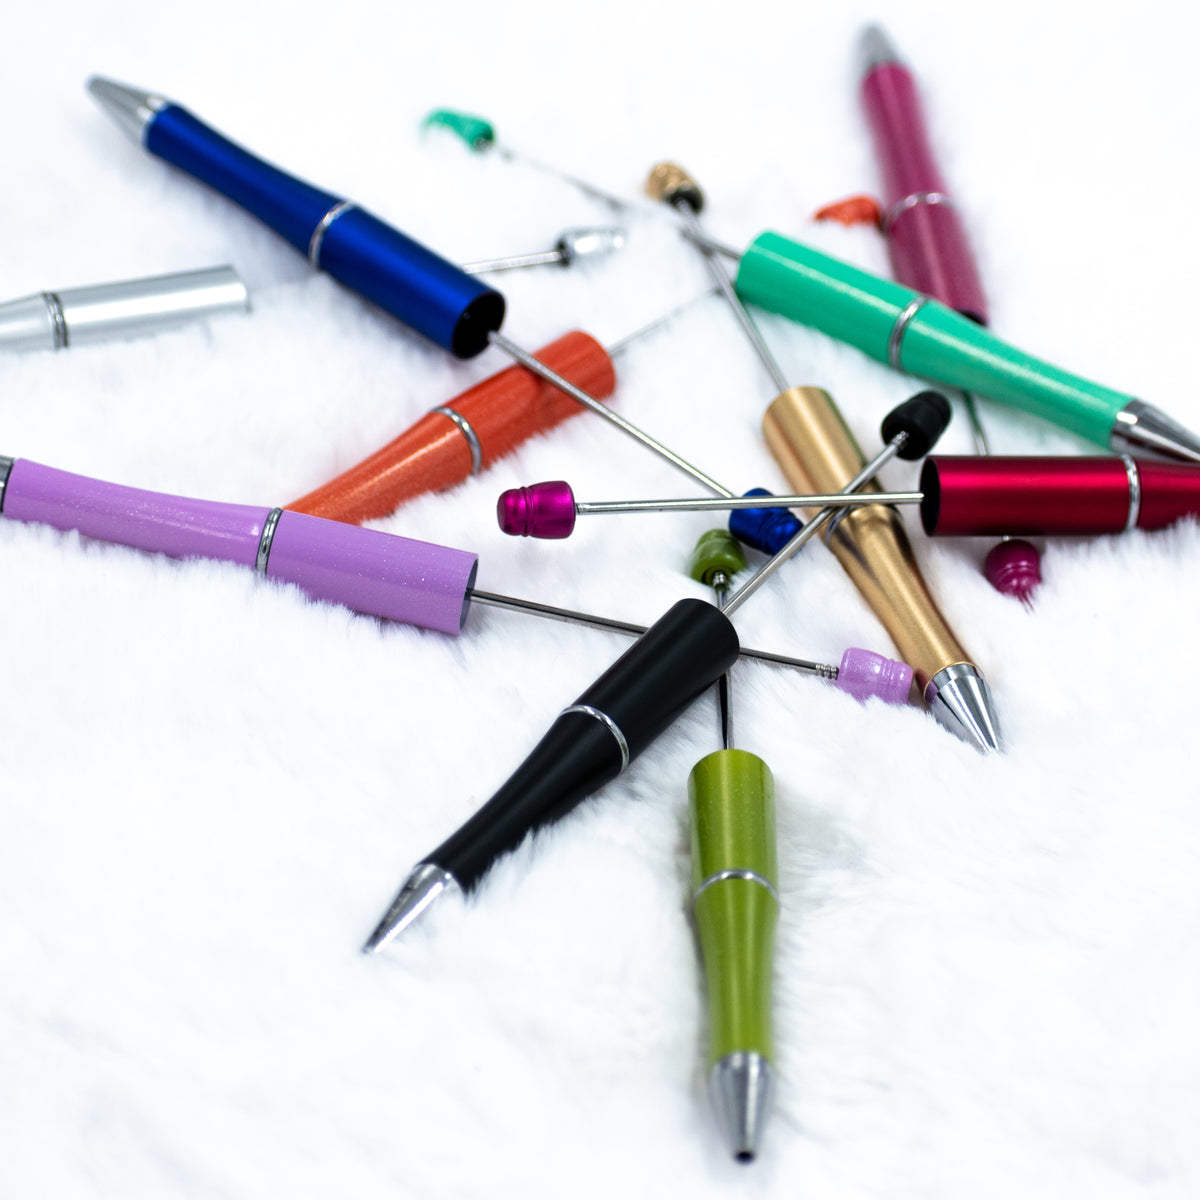 beaded pens  Beadable products, Fancy pens, Pen craft